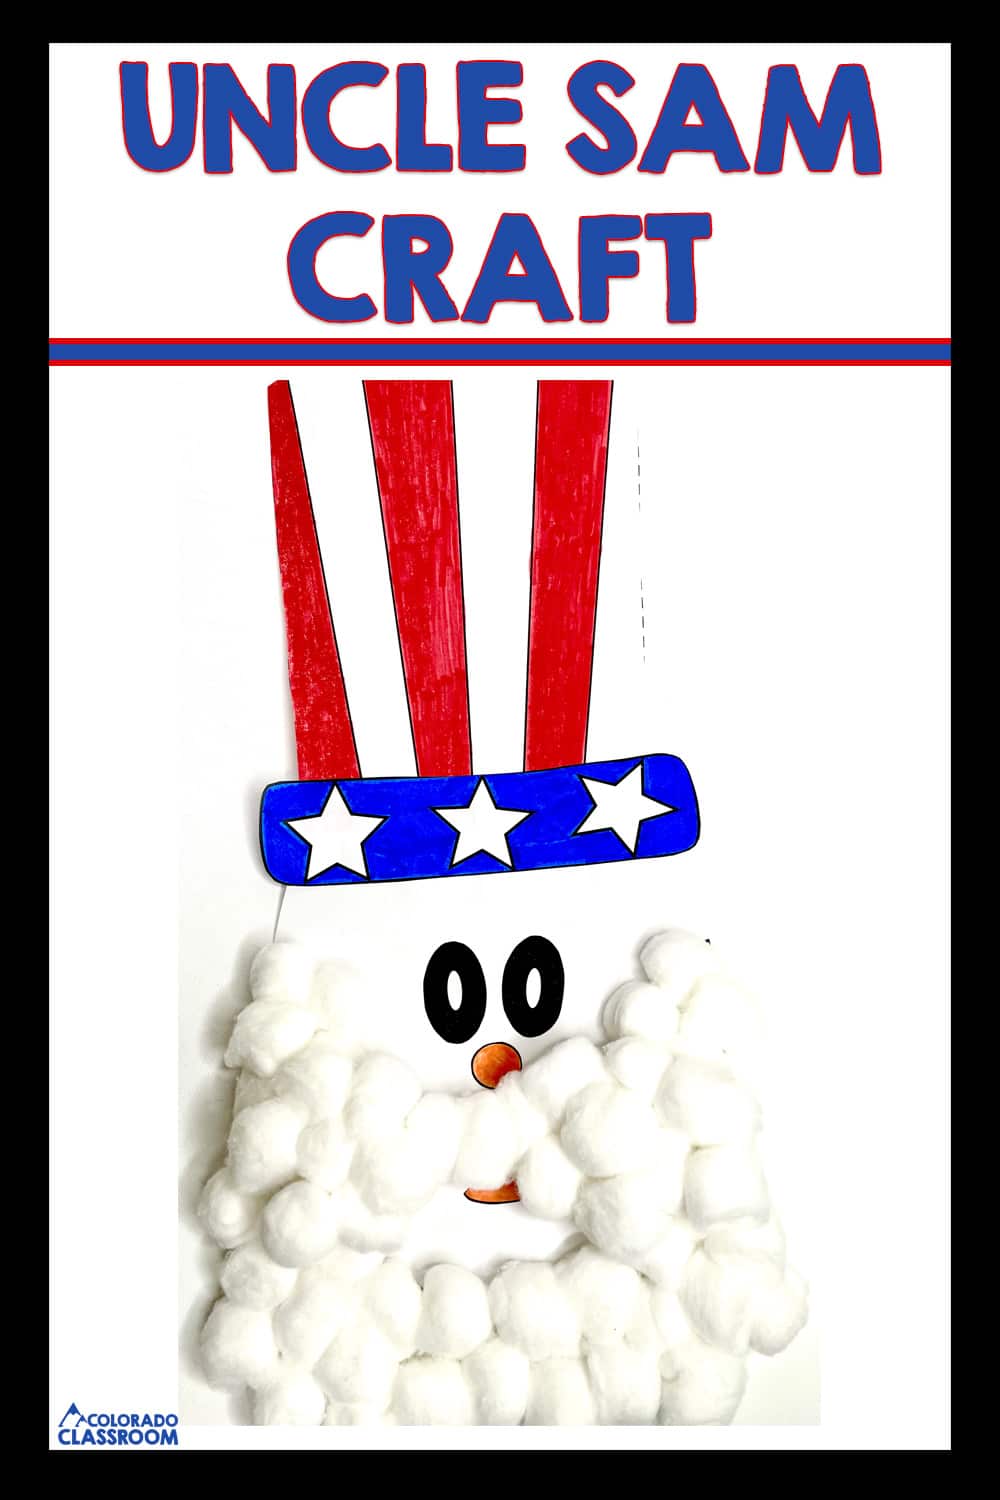 This easy 4th of July craft is a paper and cotton ball rendition of Uncle Sam. In red, white, and blue stars, stripes, and cotton balls Uncle Sam comes to life with this cute and easy craft.